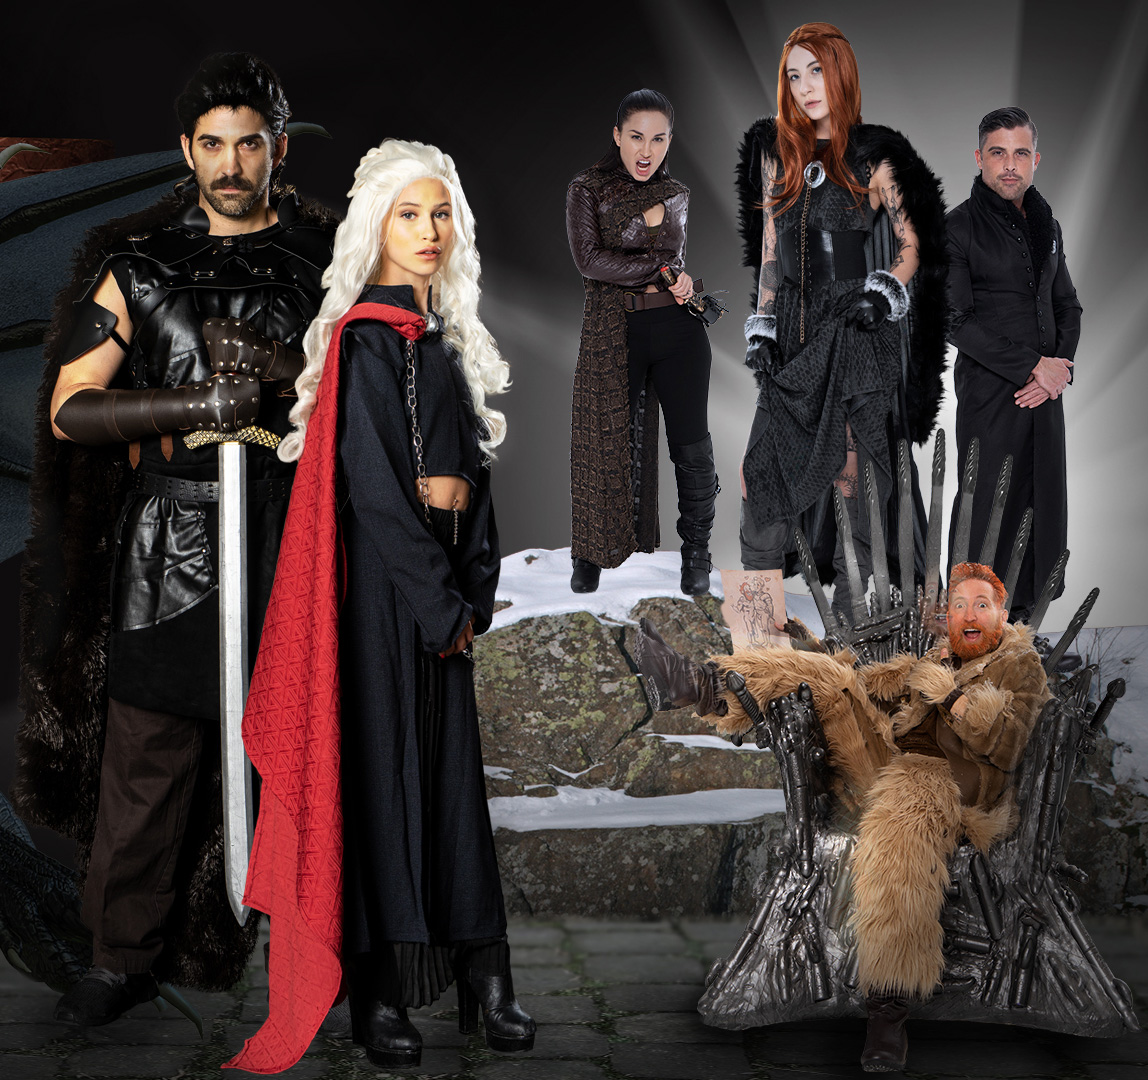 donna campion recommends queen of thrones parody pic